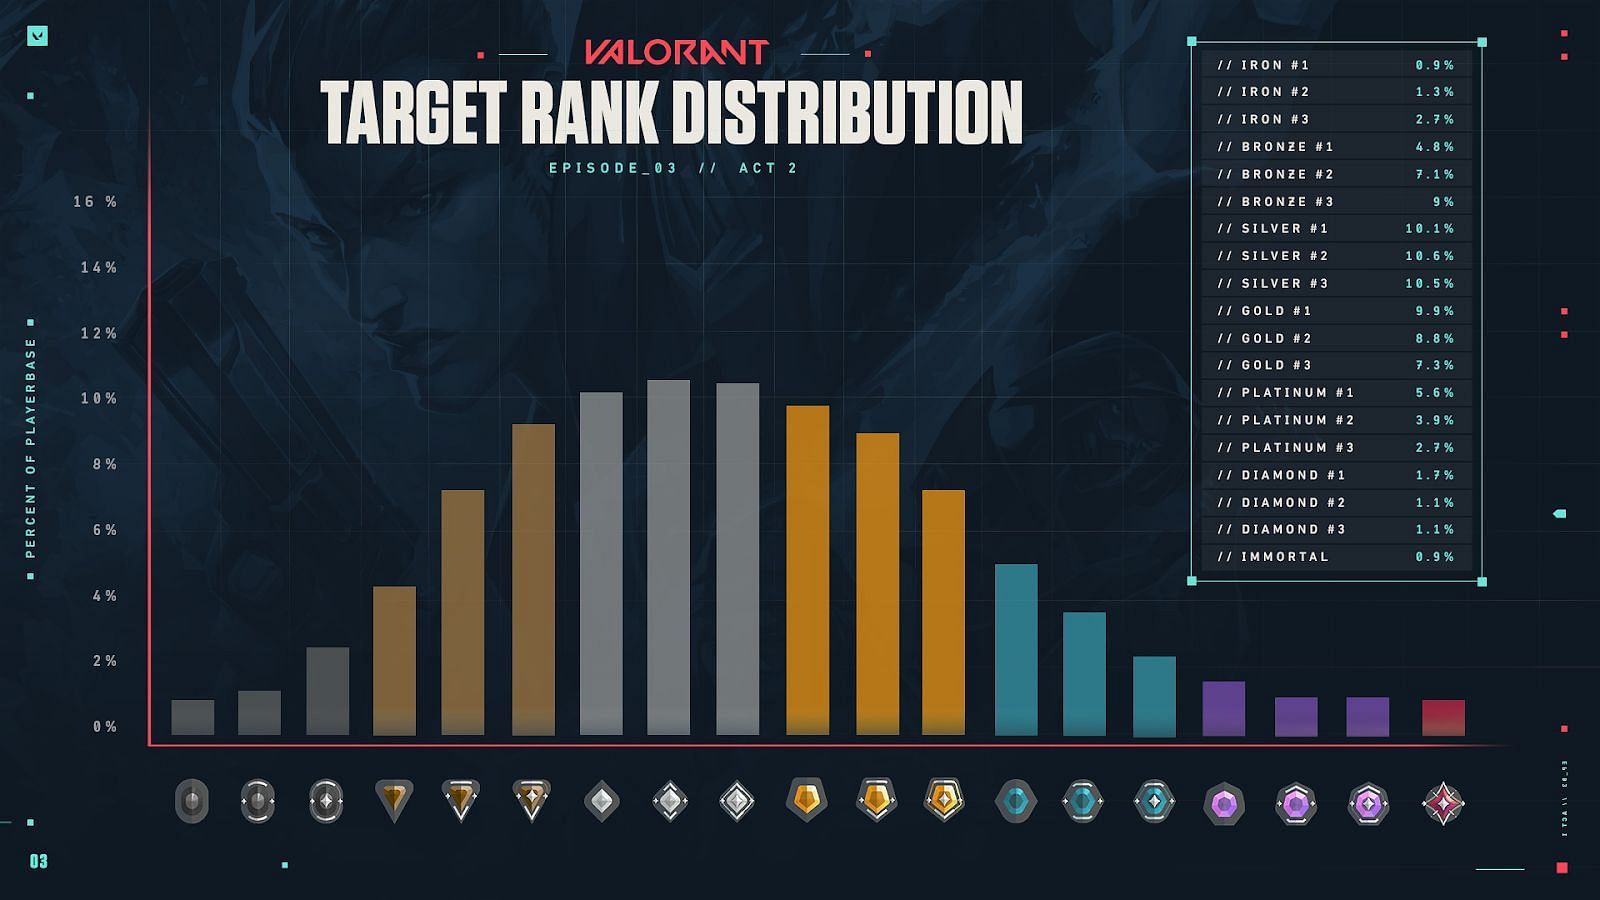 Target rank distribution in Valorant (Image by Riot Games)